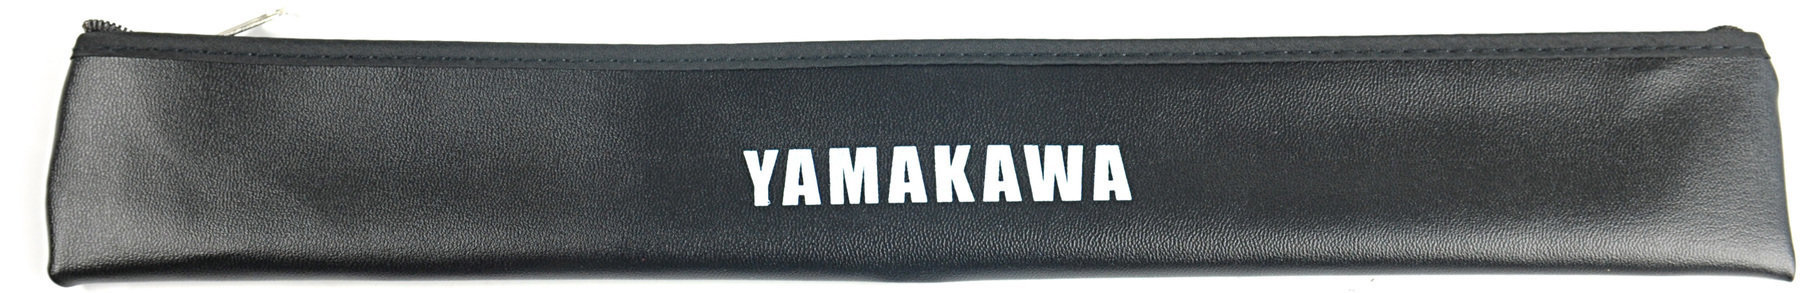 Protective cover for recorder Yamakawa RB-S2 Protective cover for recorder